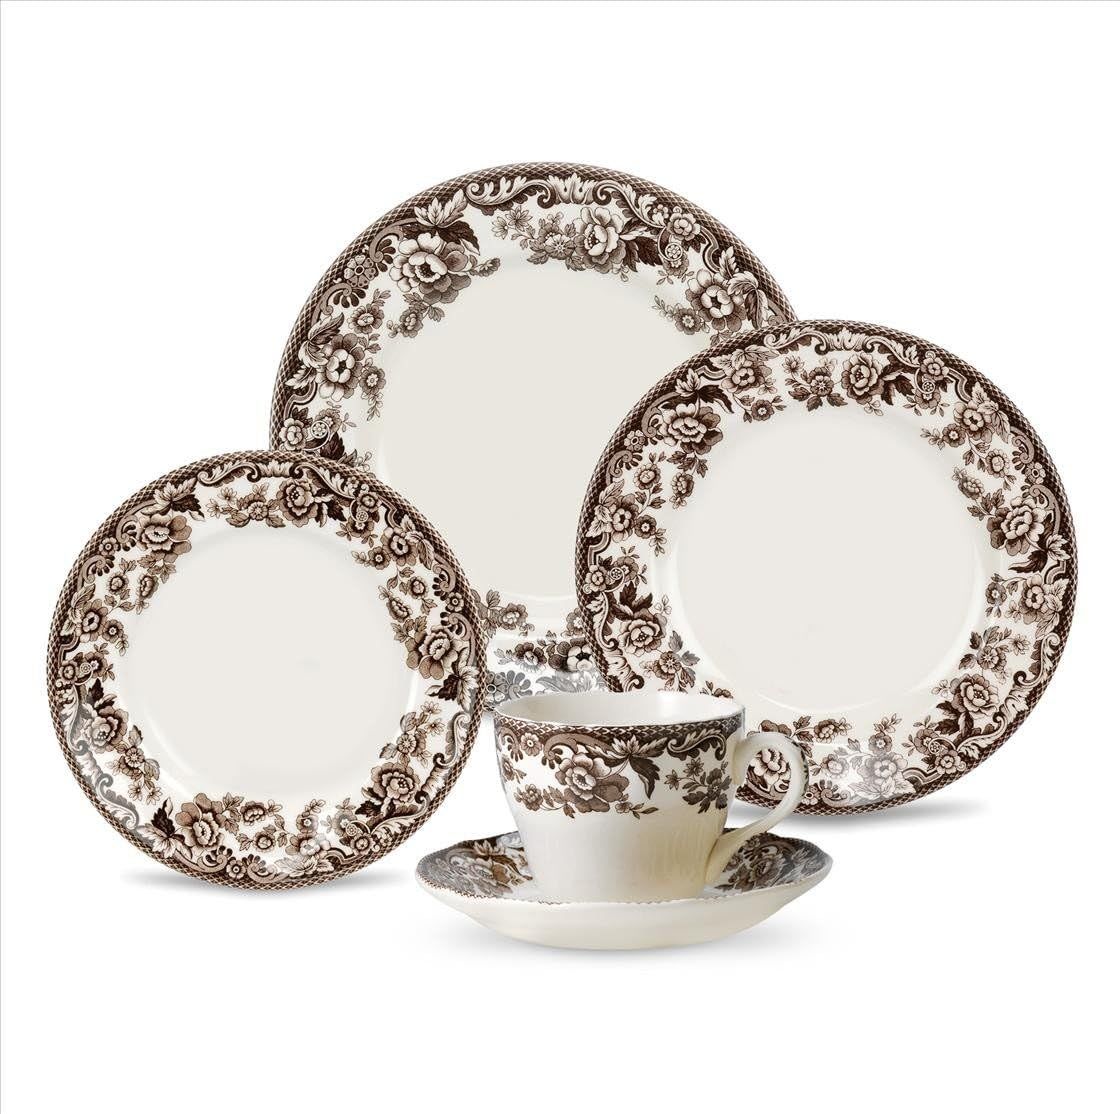 Spode Delamere 5 Piece Place Setting, Brown Earthenware, Includes Dinner Plate, Salad Plate, Brea... | Amazon (US)